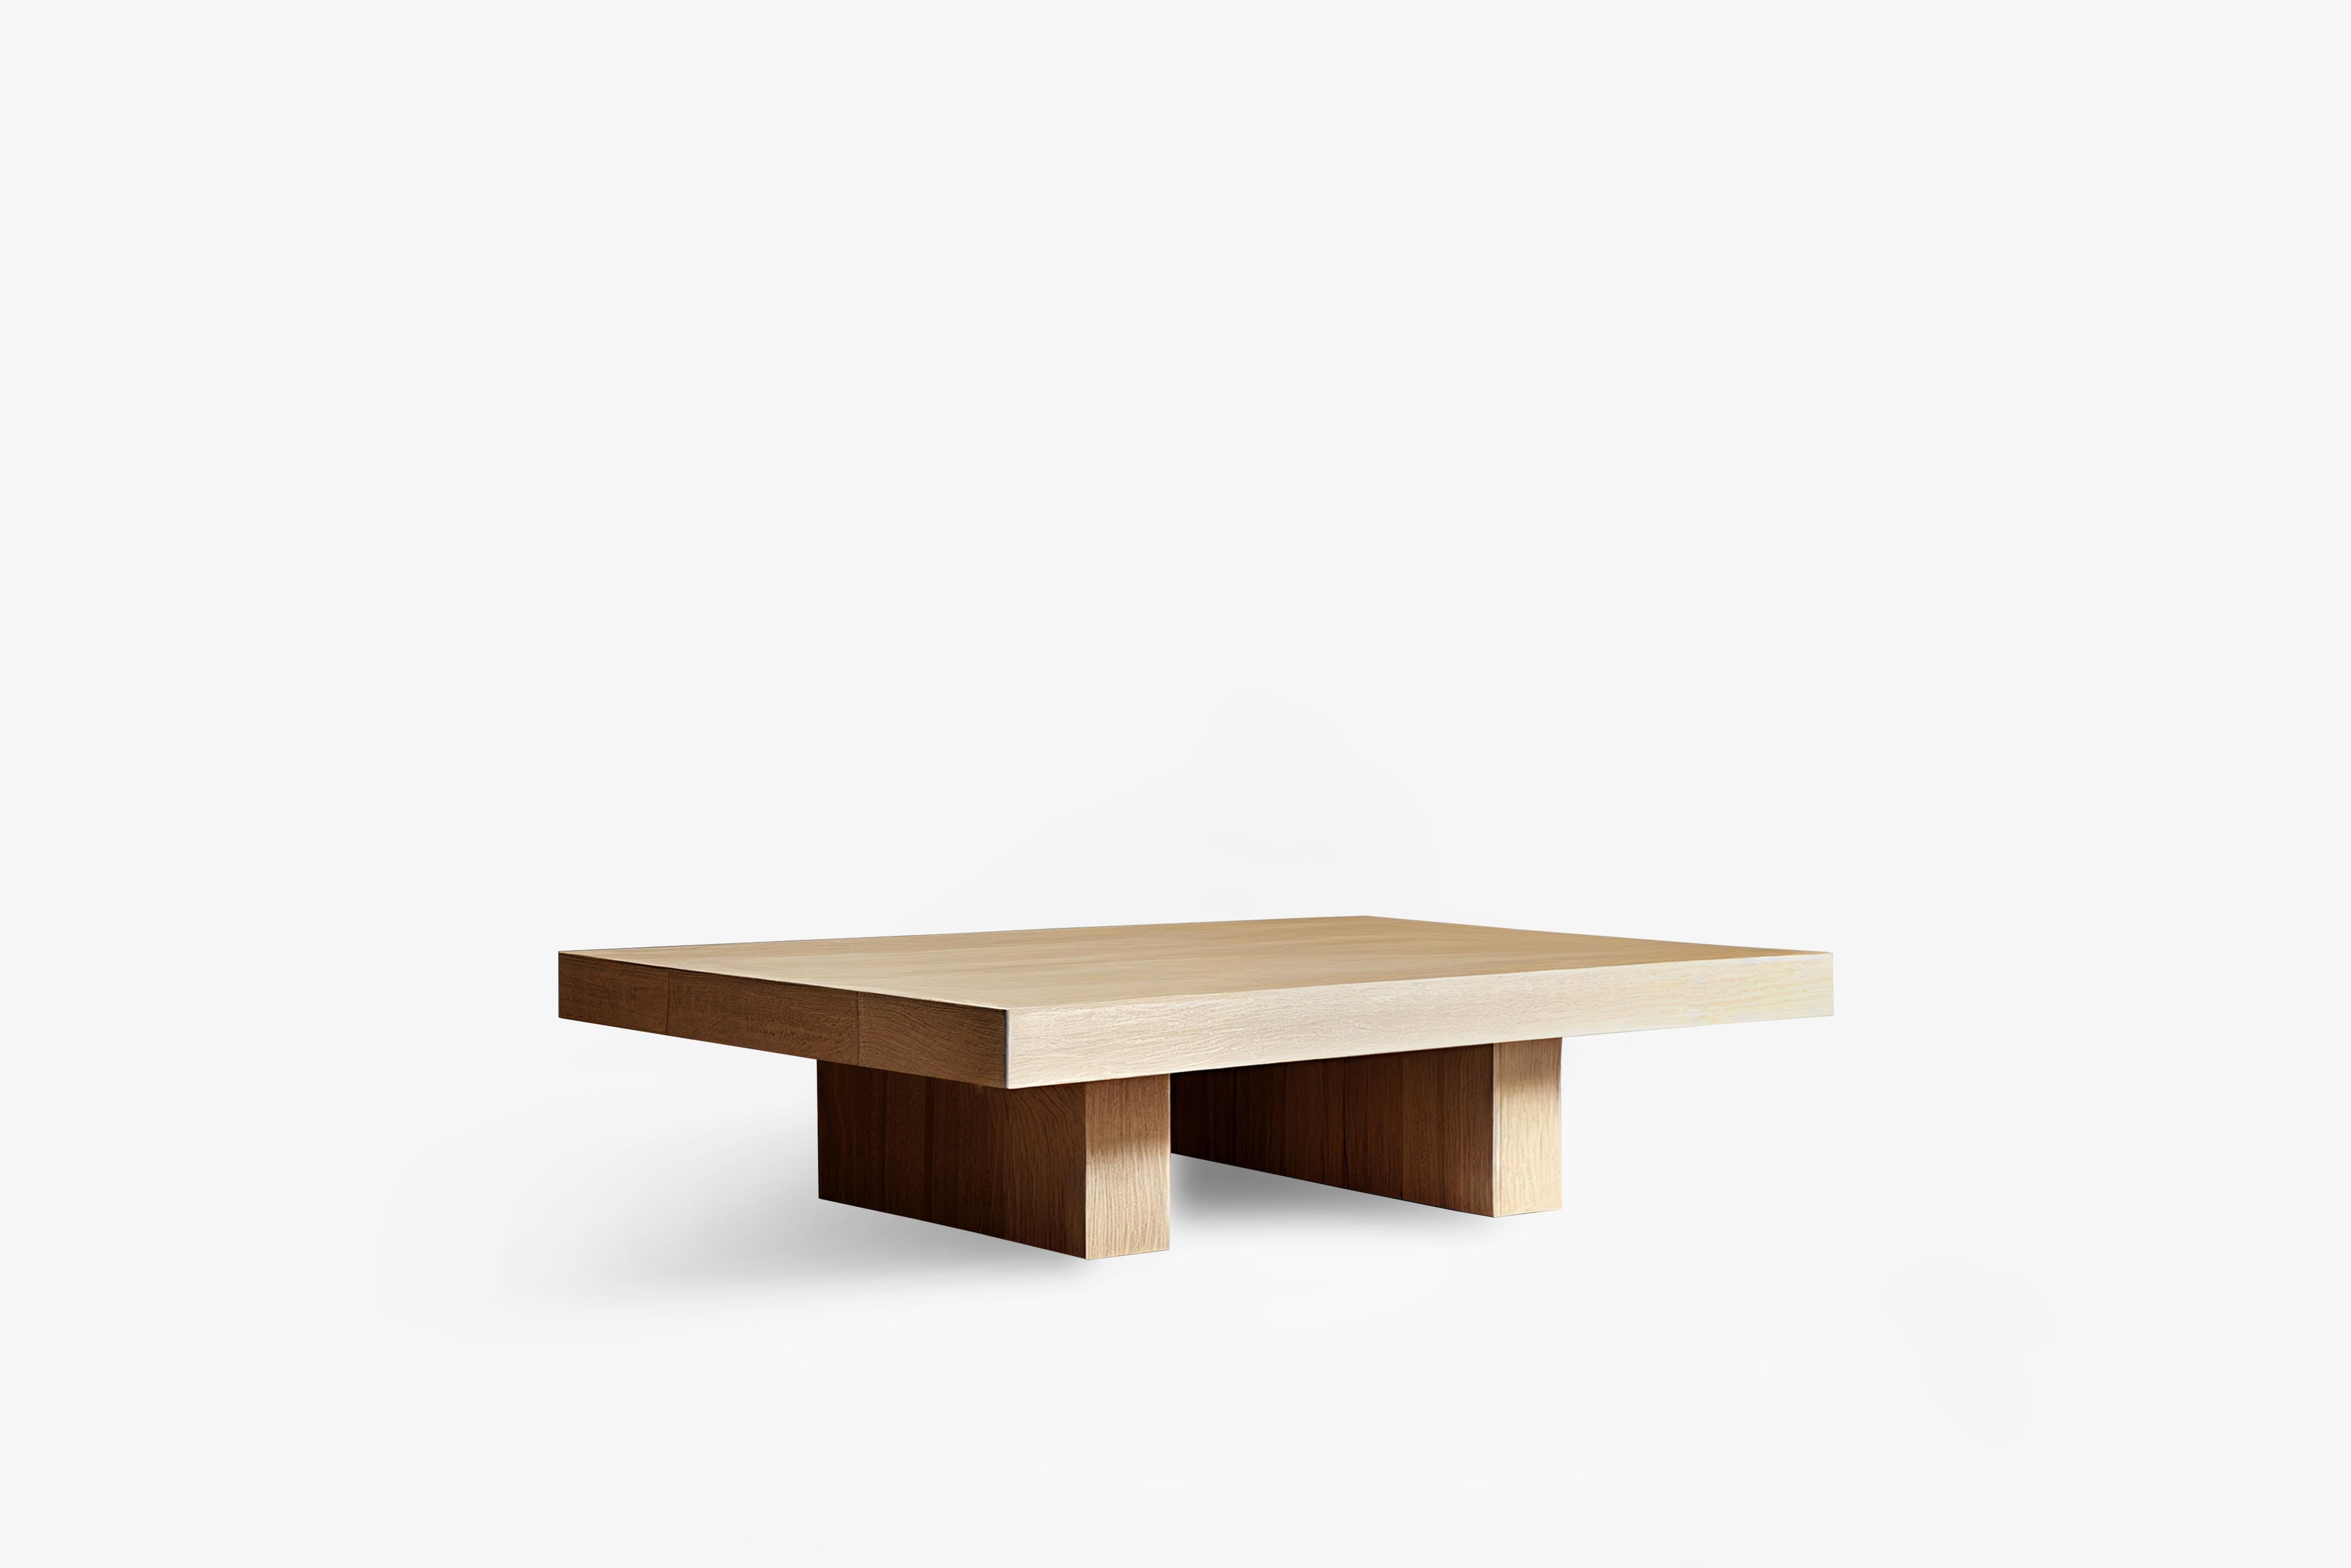 Mexican Rectangular Coffee Table Made of Solid Oak Wood by Nono Furniture For Sale